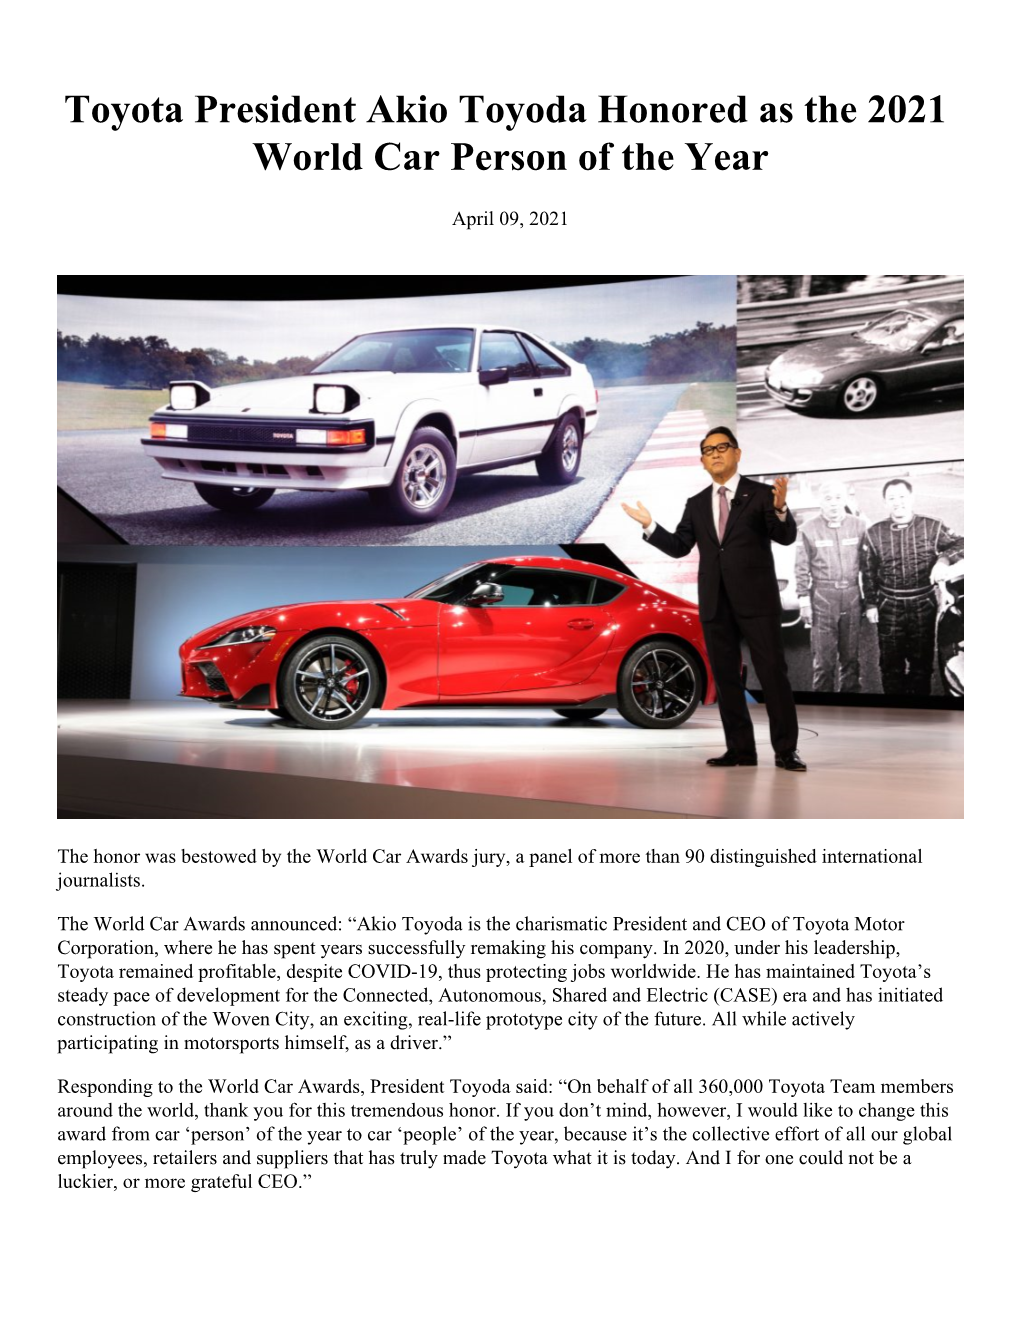 Toyota President Akio Toyoda Honored As the 2021 World Car Person of the Year